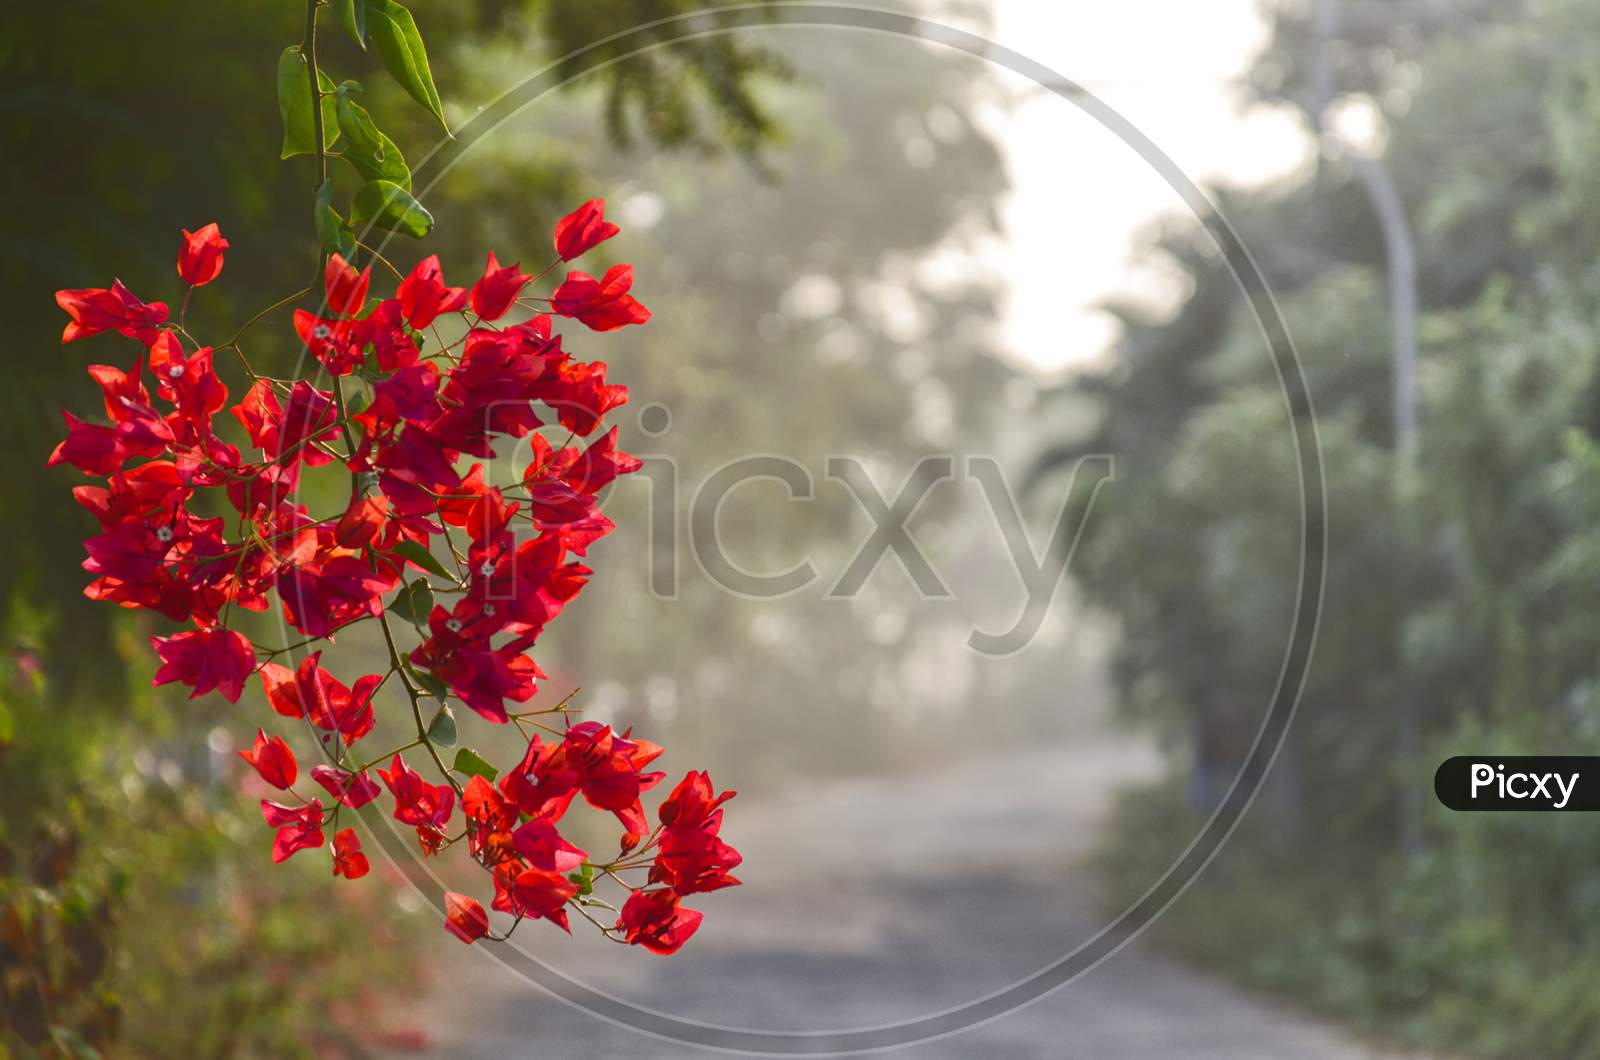 Bunches of red flower by the roadside.